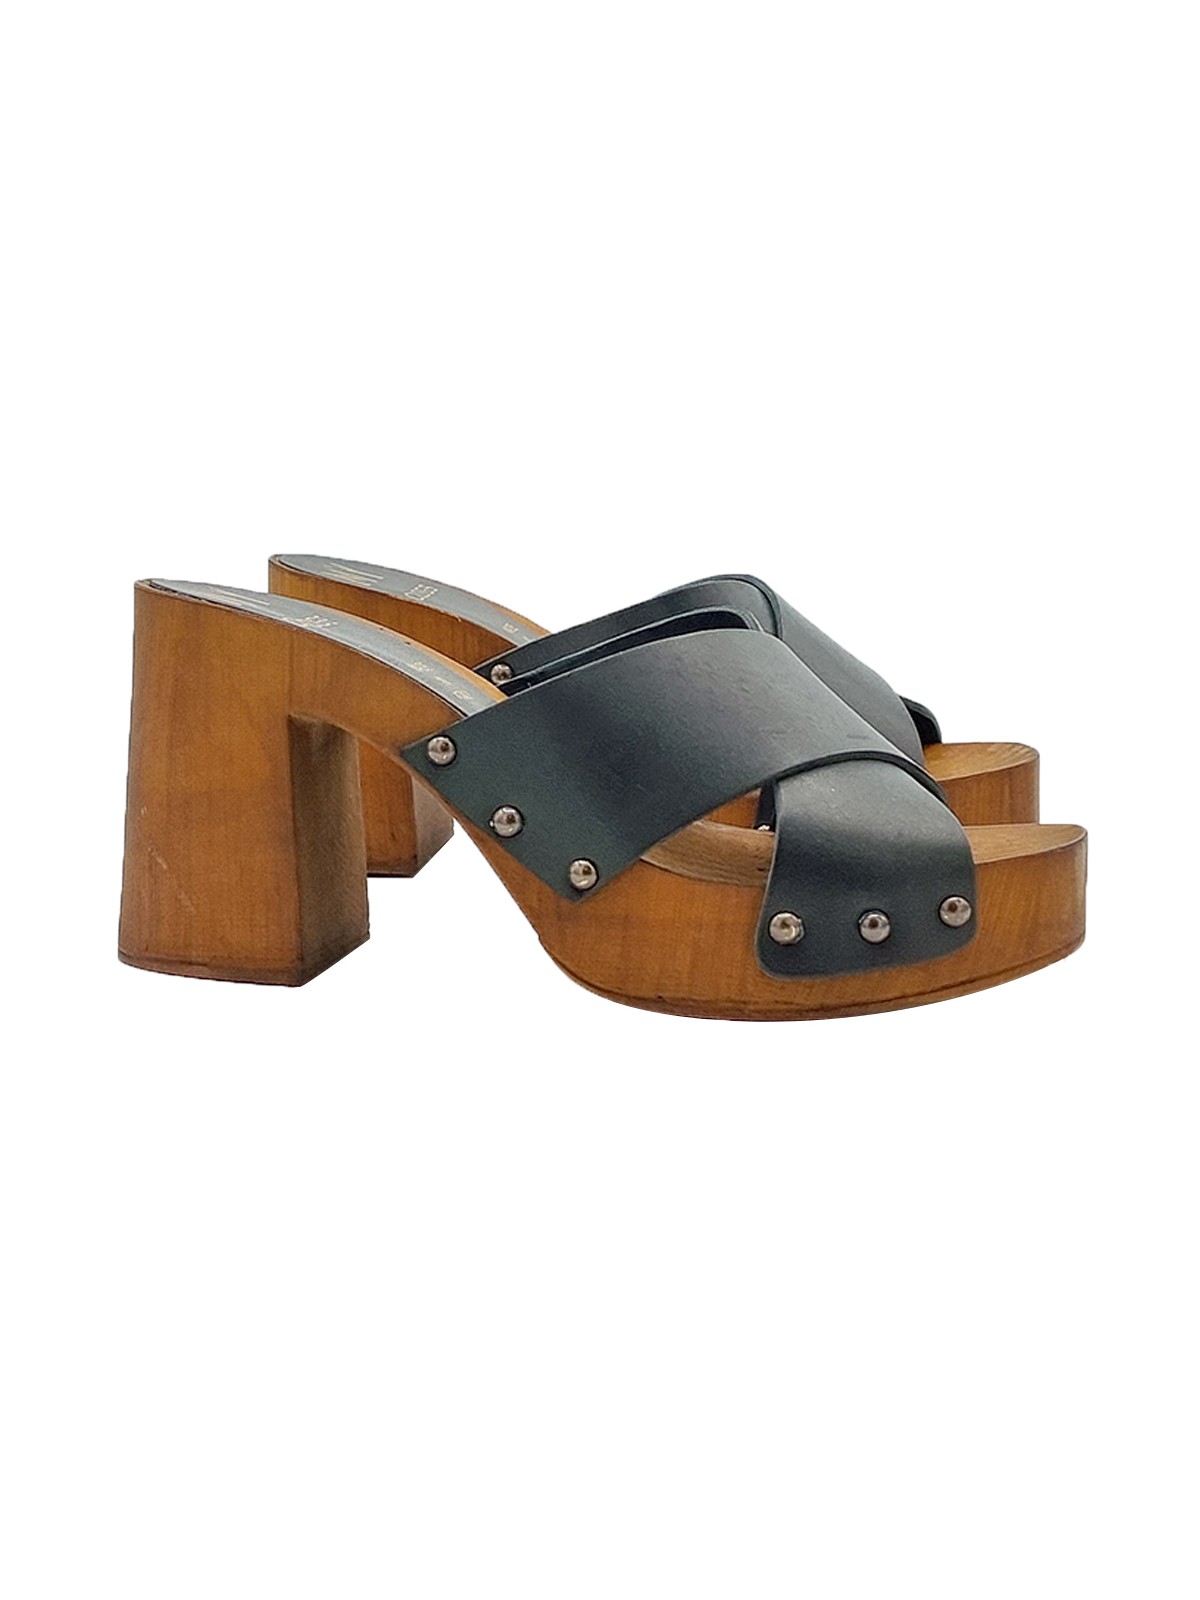 BLACK MULES WITH LEATHER BANDS AND HEEL 9